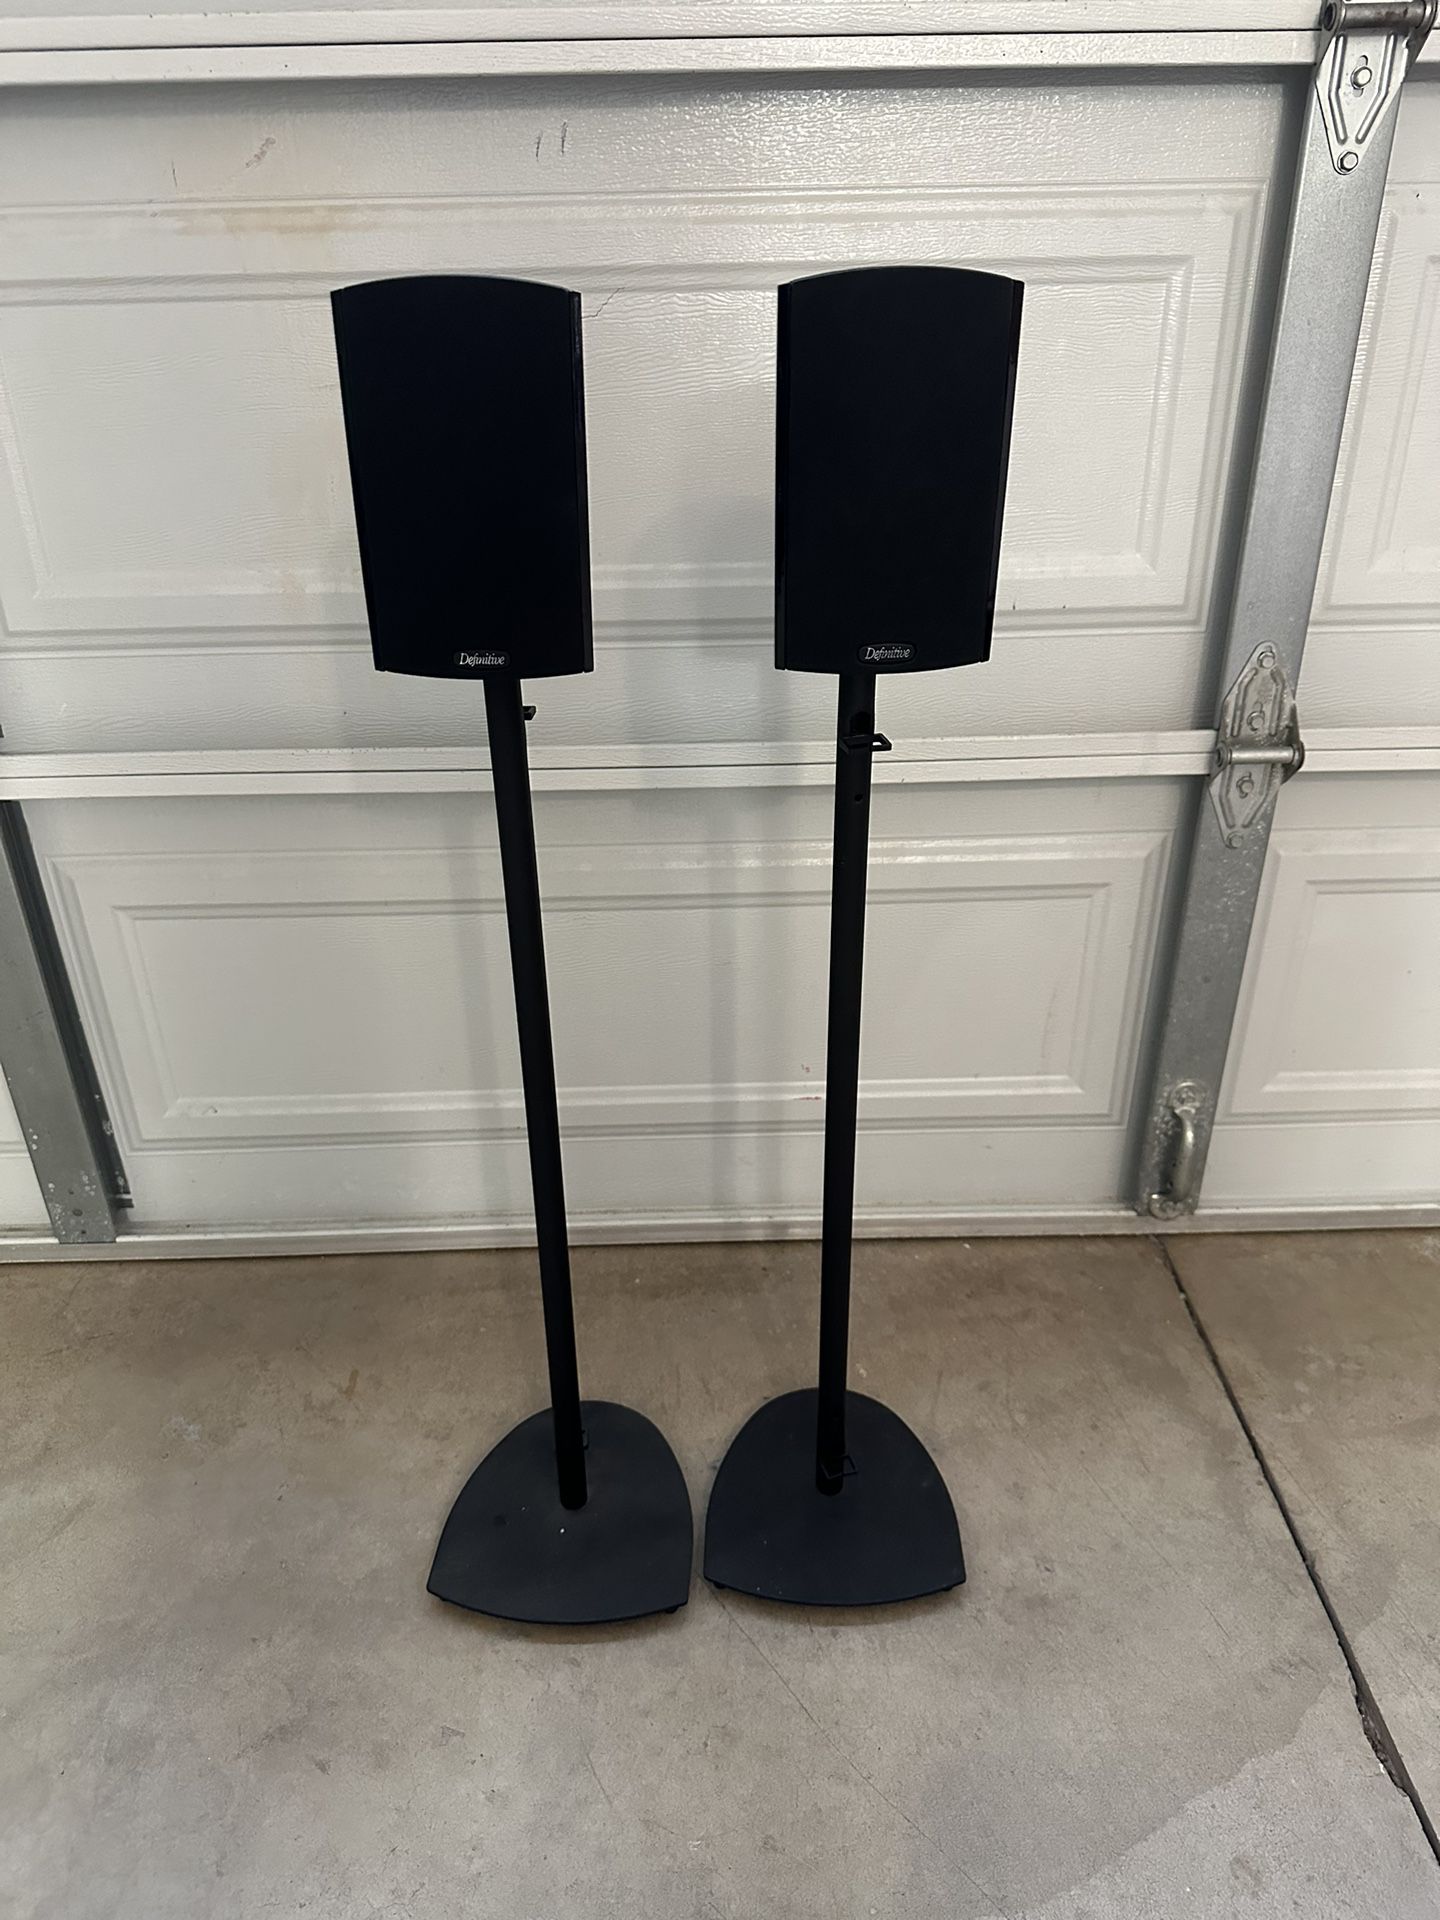 Definitive Tech Pro monitor 800 Satellite Speakers With Stand 